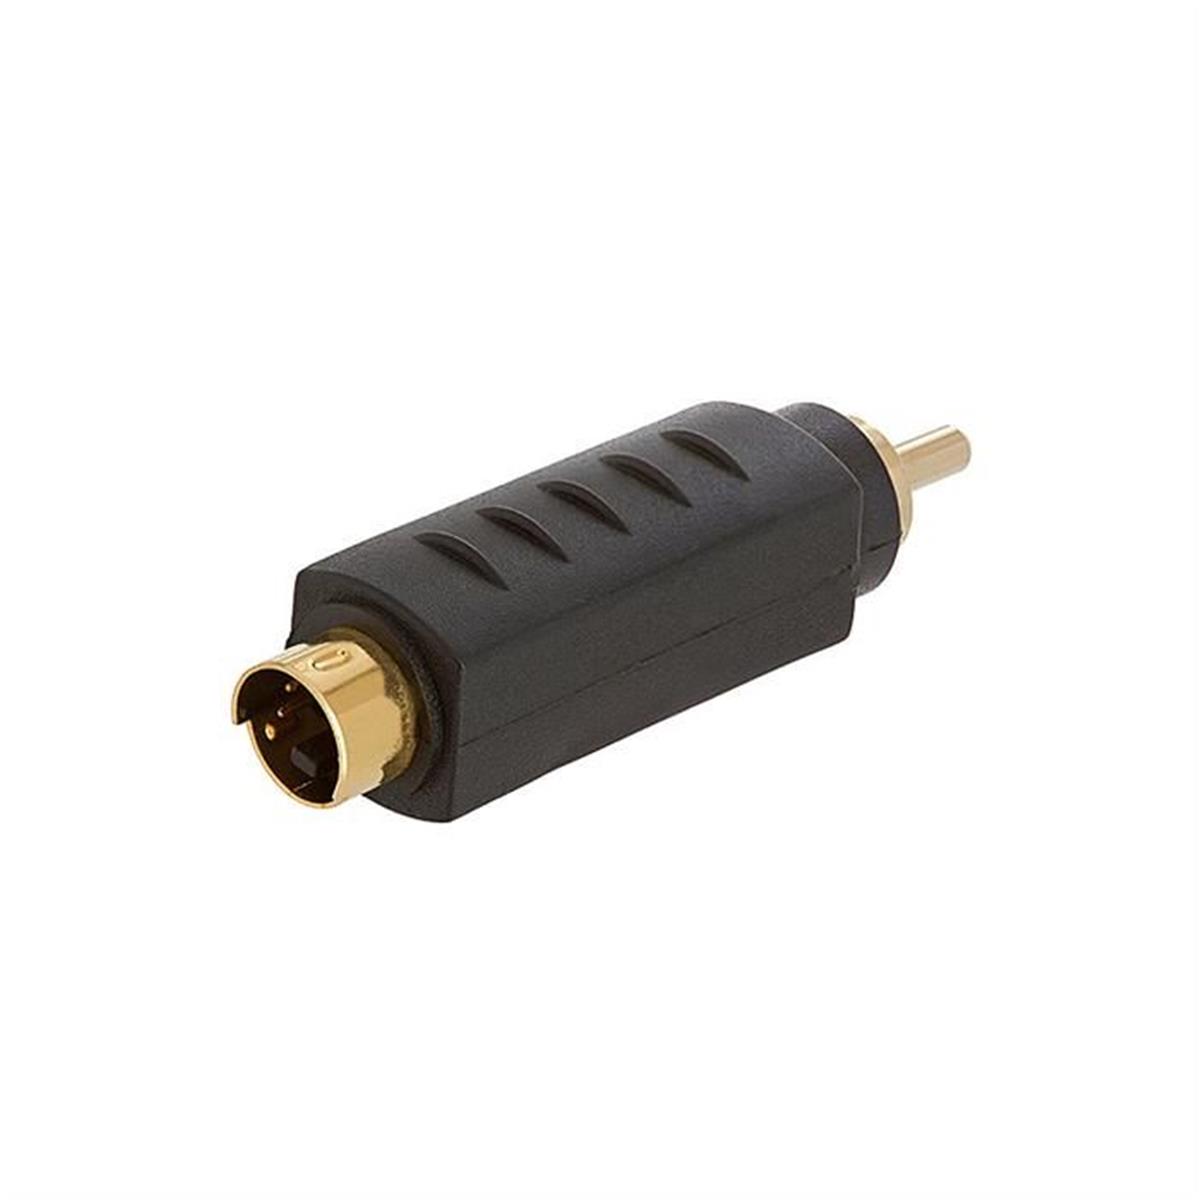 Picture of CMPLE 1131-N S-VHS 4Pin Plug to RCA Plug Adapter